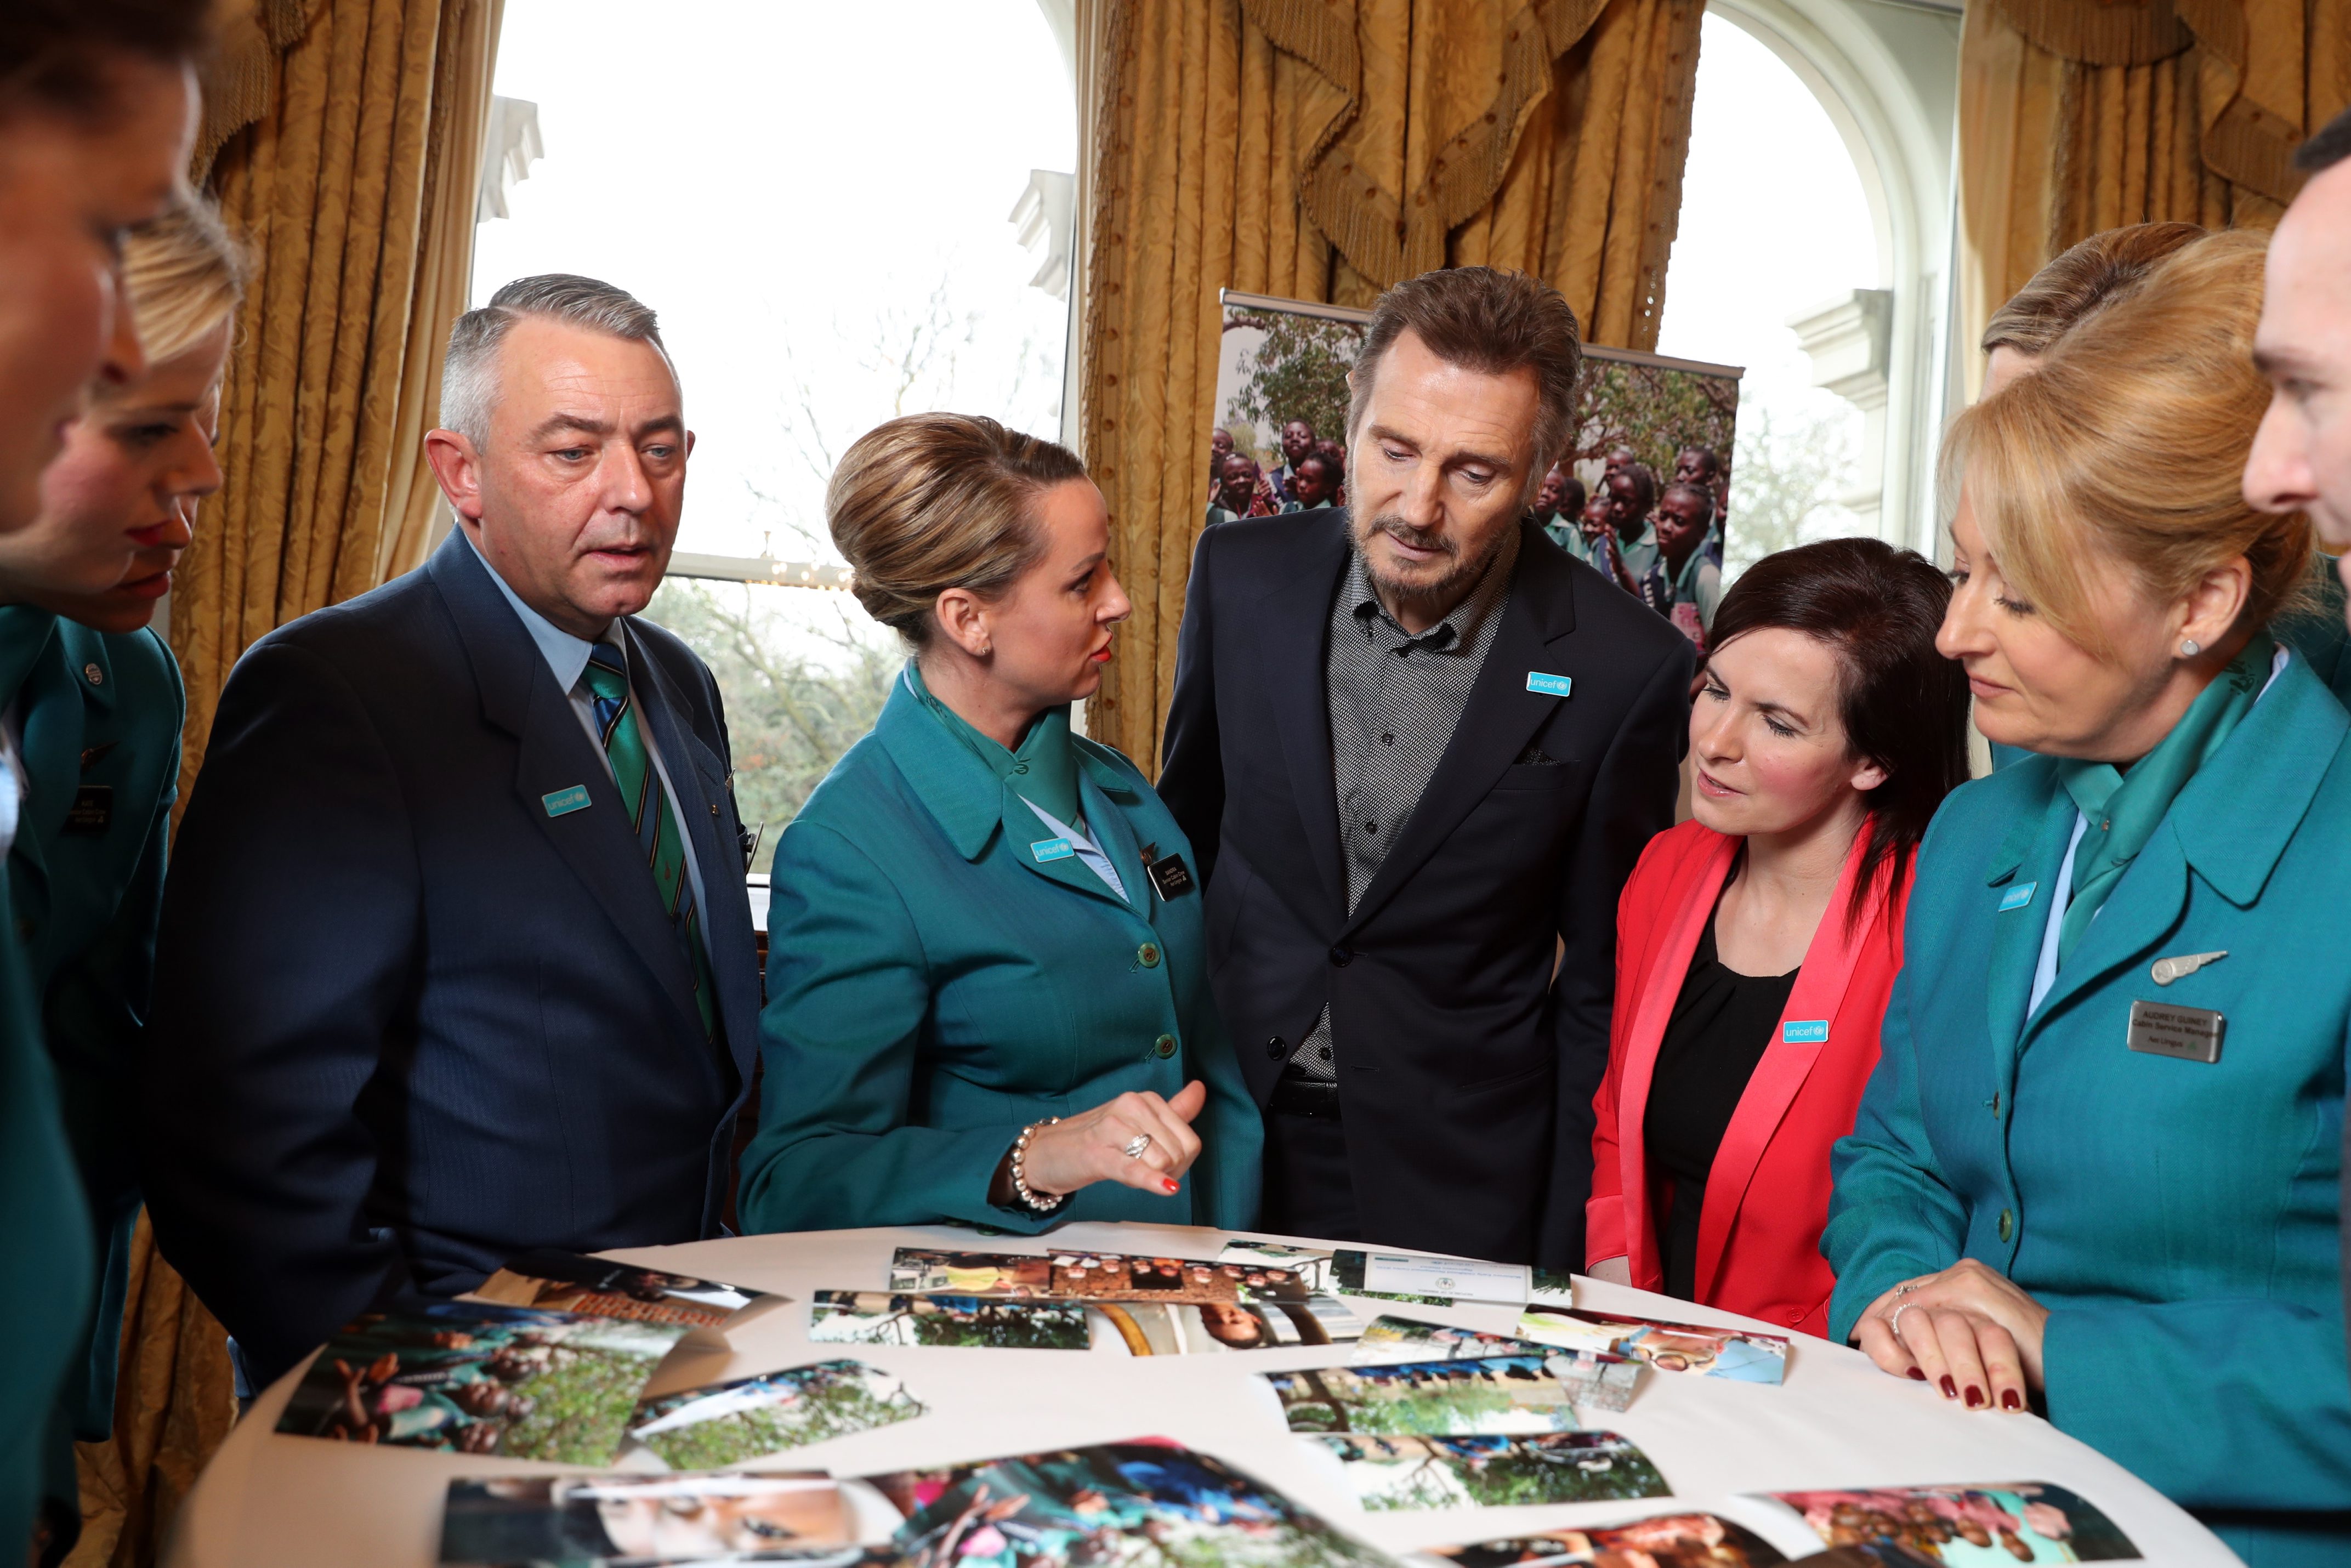 Liam Neeson Thanks Aer Lingus Guests for €21m UNICEF Fundraising